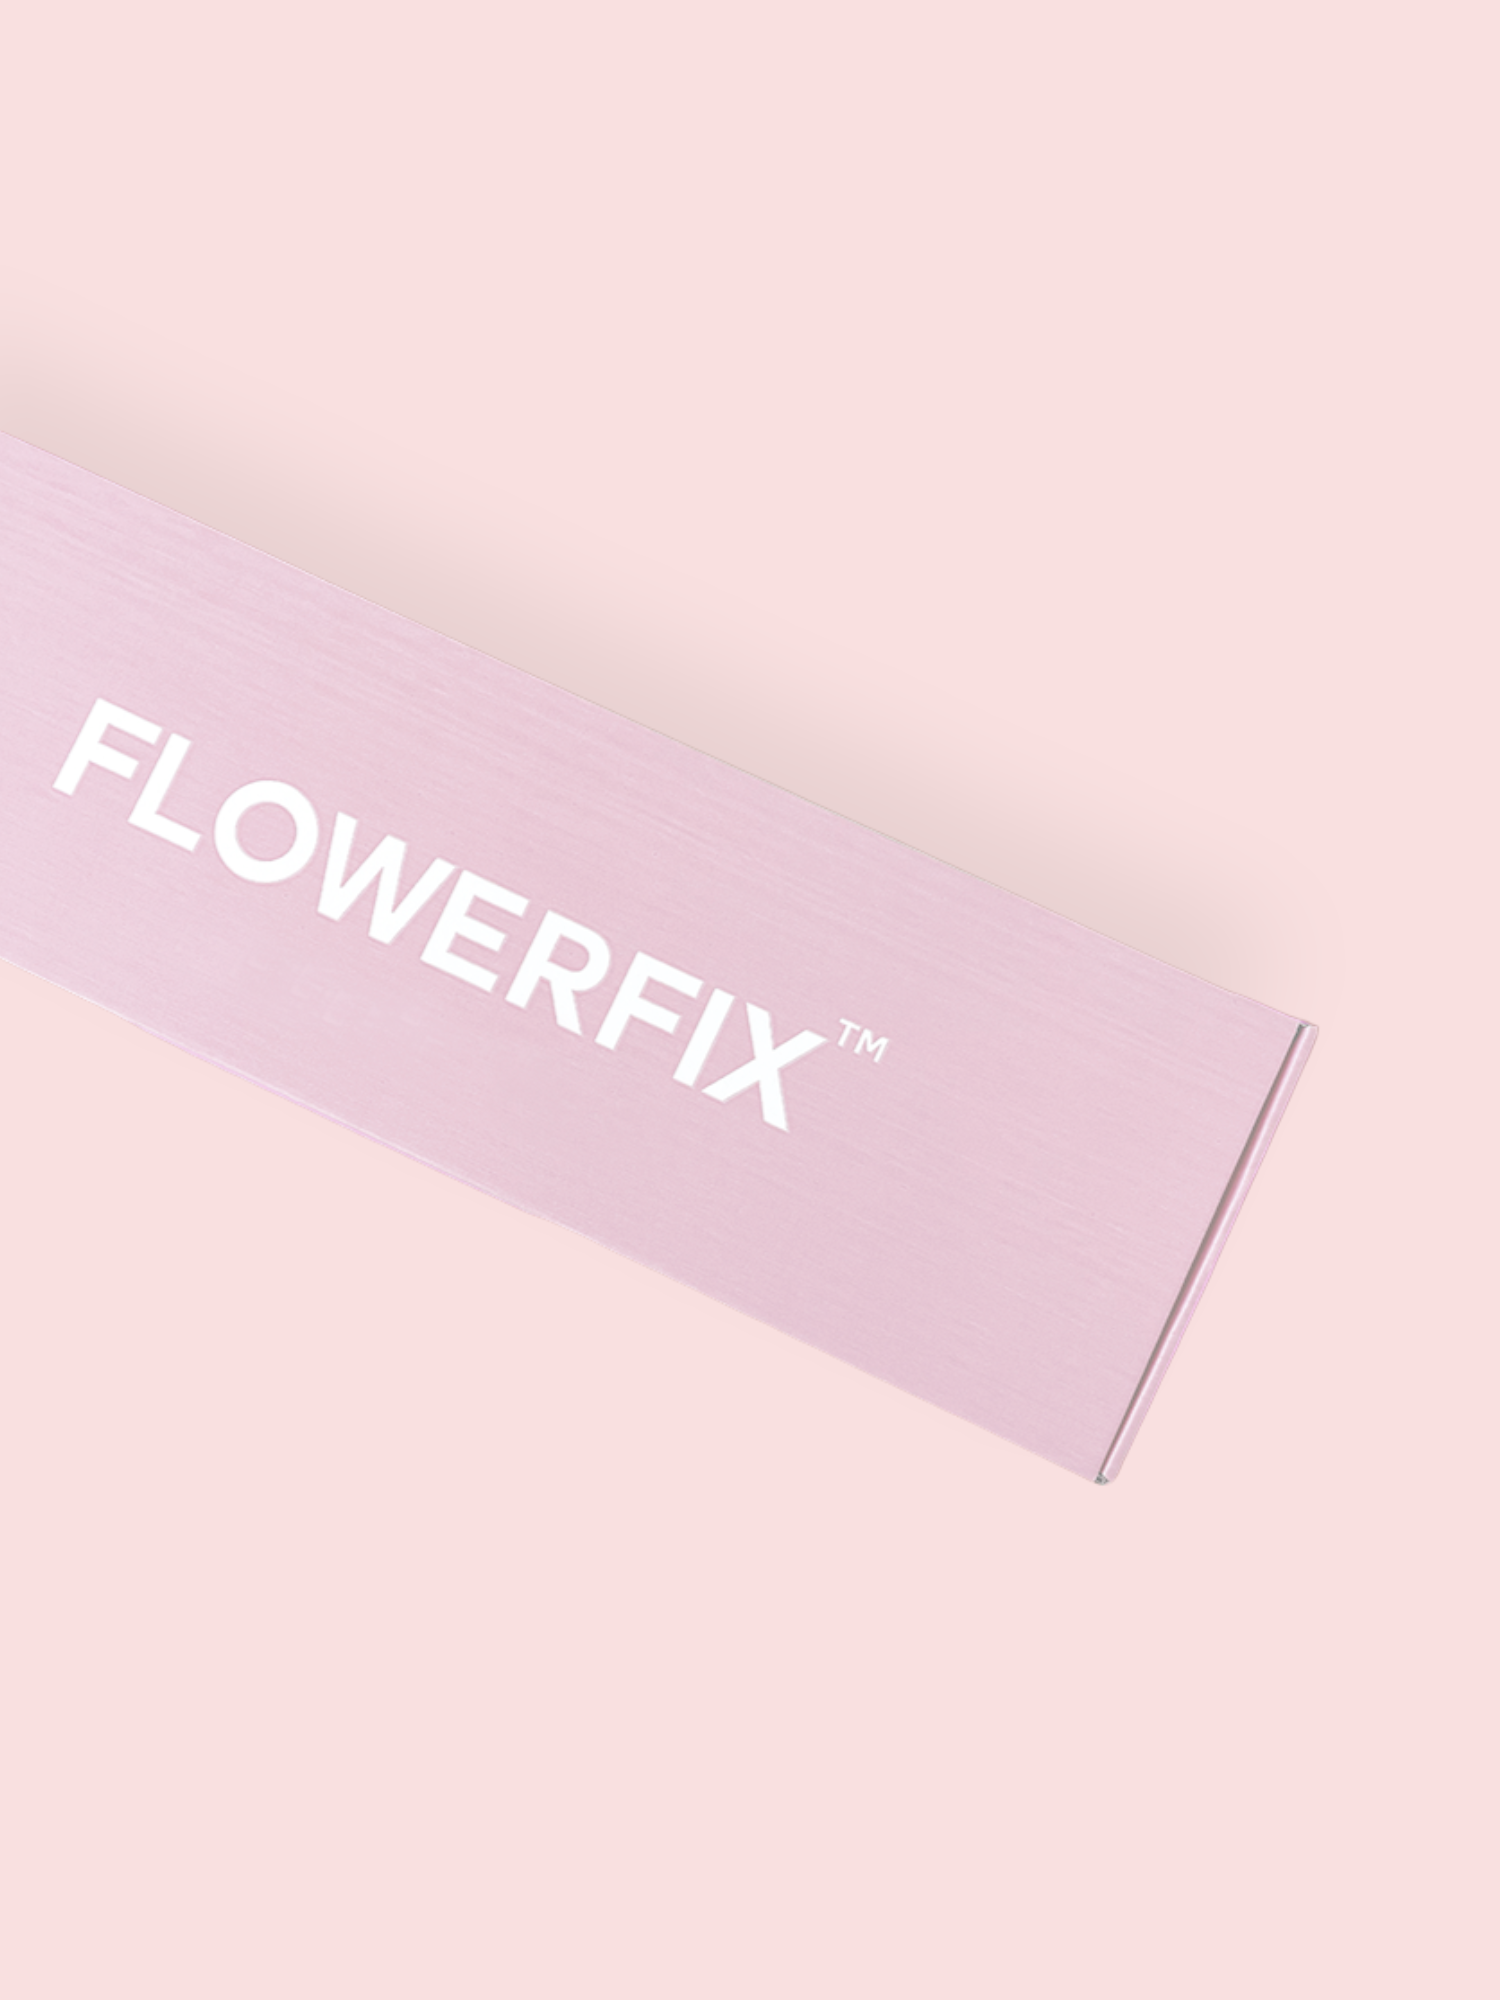 Bunny Tails Delivery - FLOWERFIX